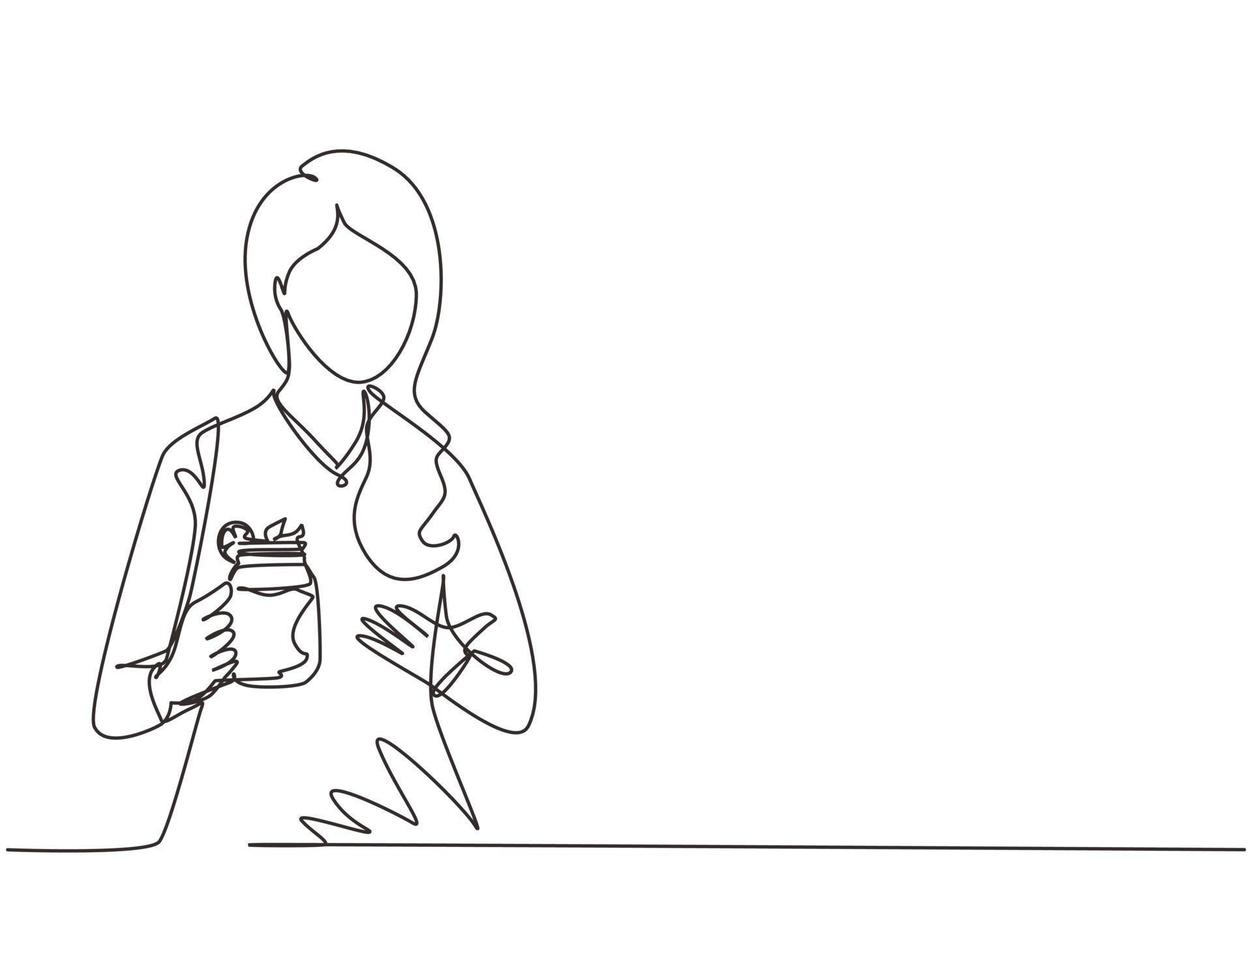 Continuous one line drawing pretty woman holds and show mug of lemonade with ice in hand. Young girl wearing shirt having morning breakfast with orange juice. Single line draw design vector graphic